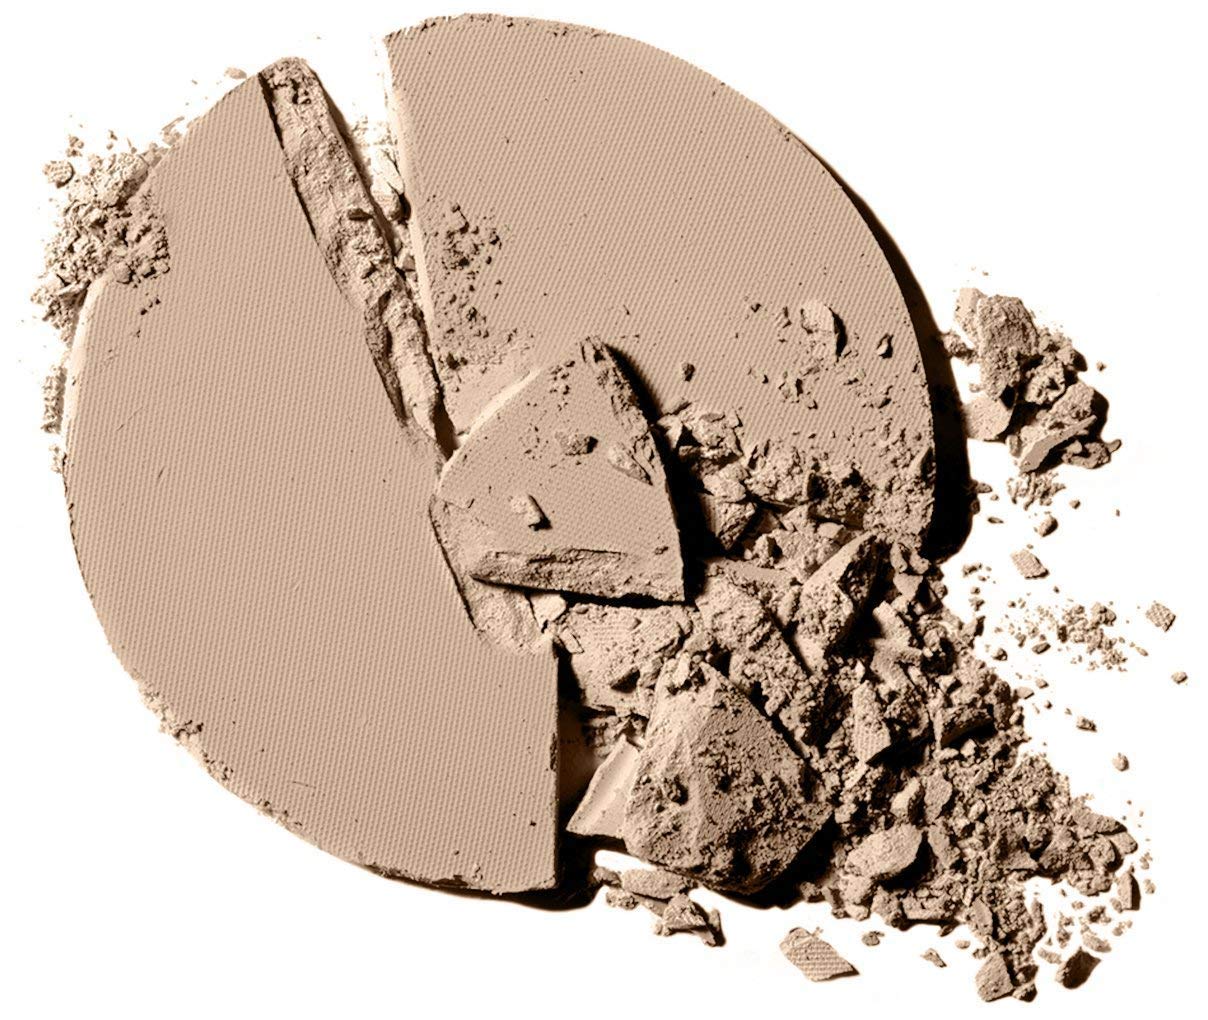 L'Oreal pressed powder Color of the Year 2021